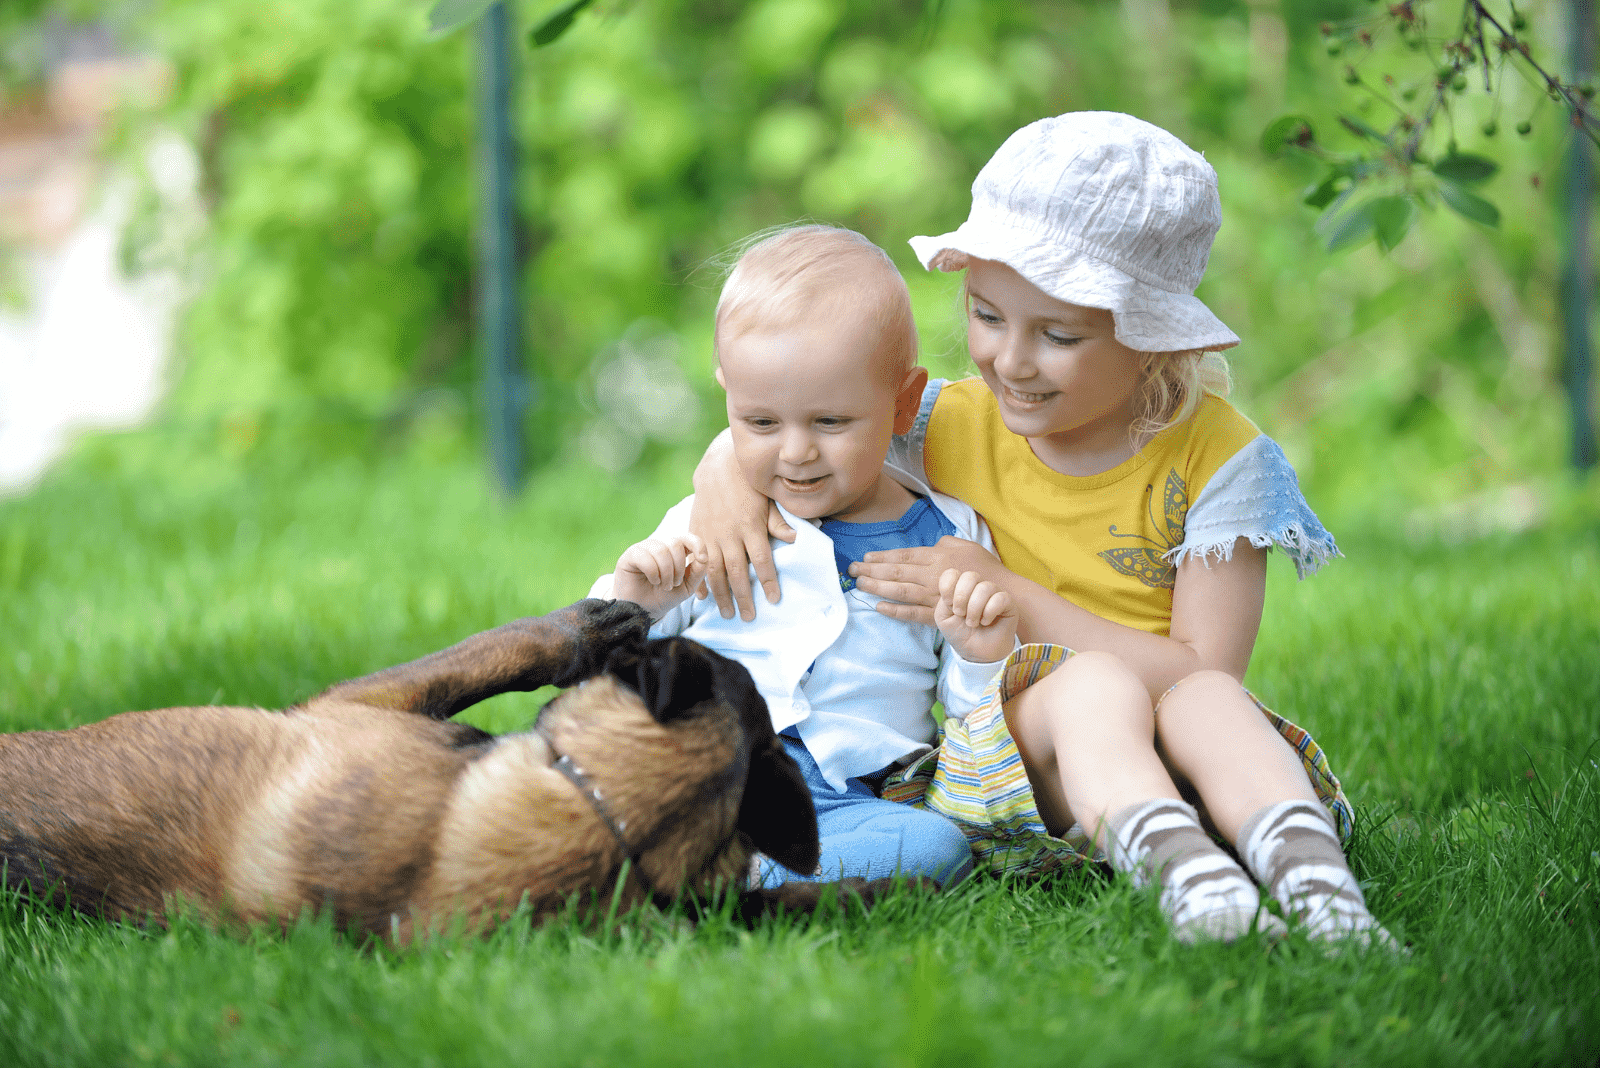 Belgian Malinois plays with children